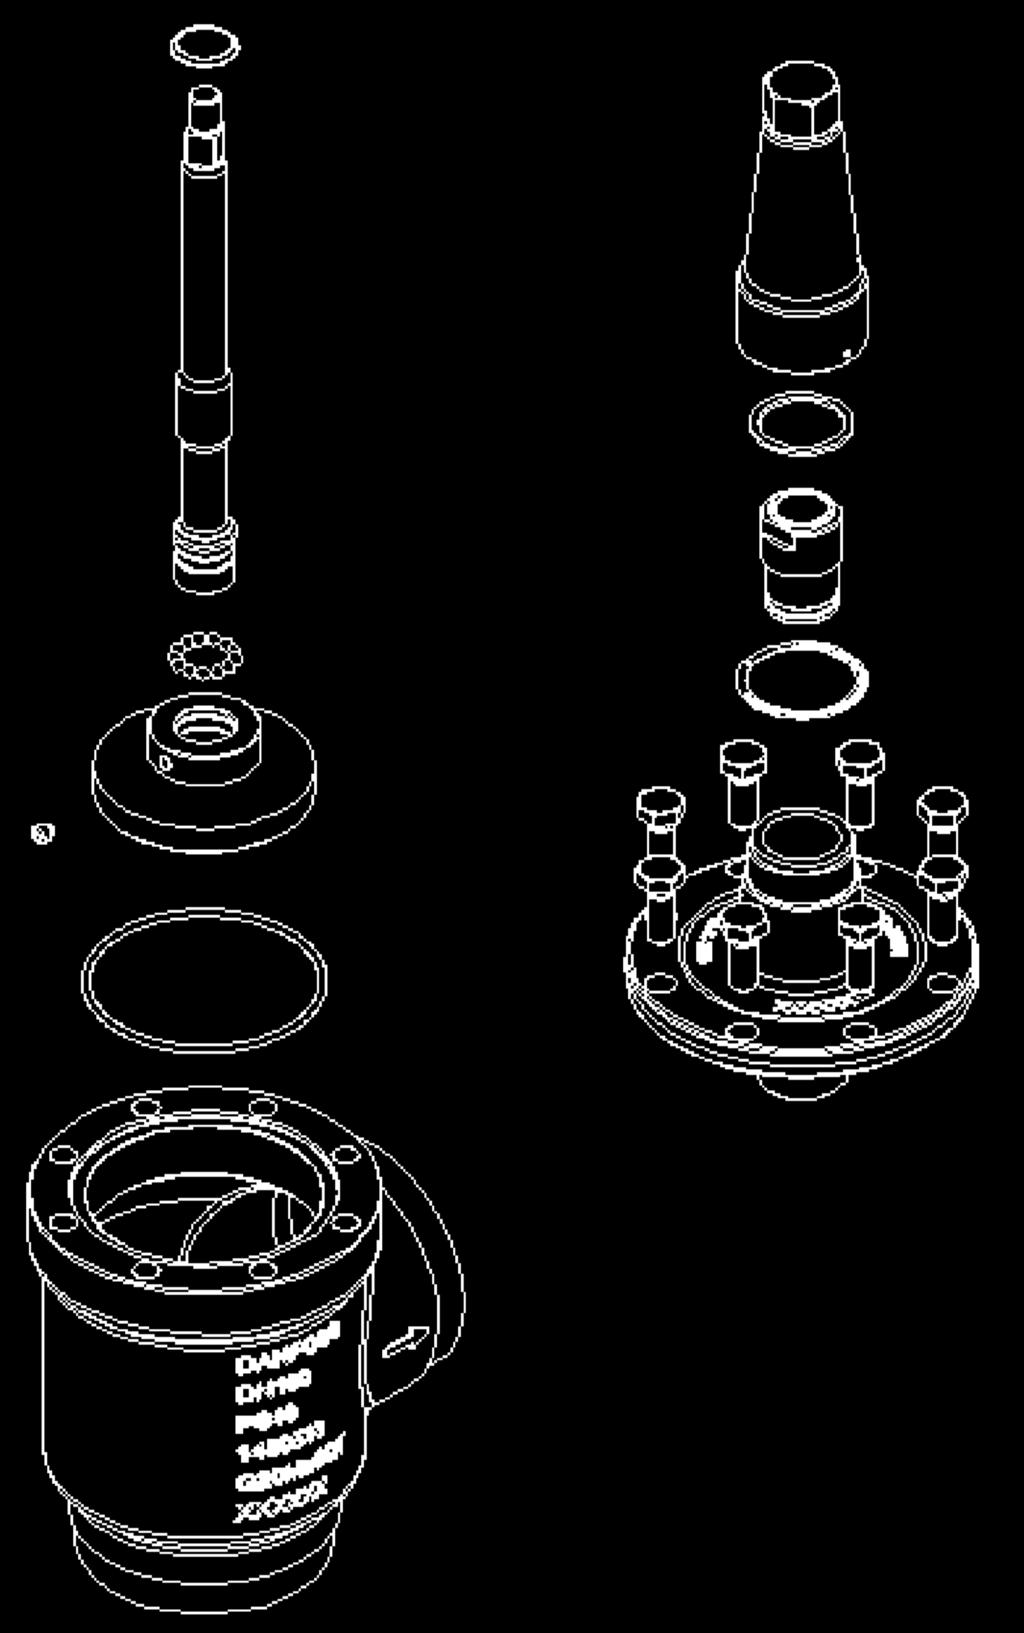 Drawings for spare parts list HPO Pos. 18: Gasket for cap Pos 8: Packing gland incl. gaskets Pos 5: Cone complete incl.